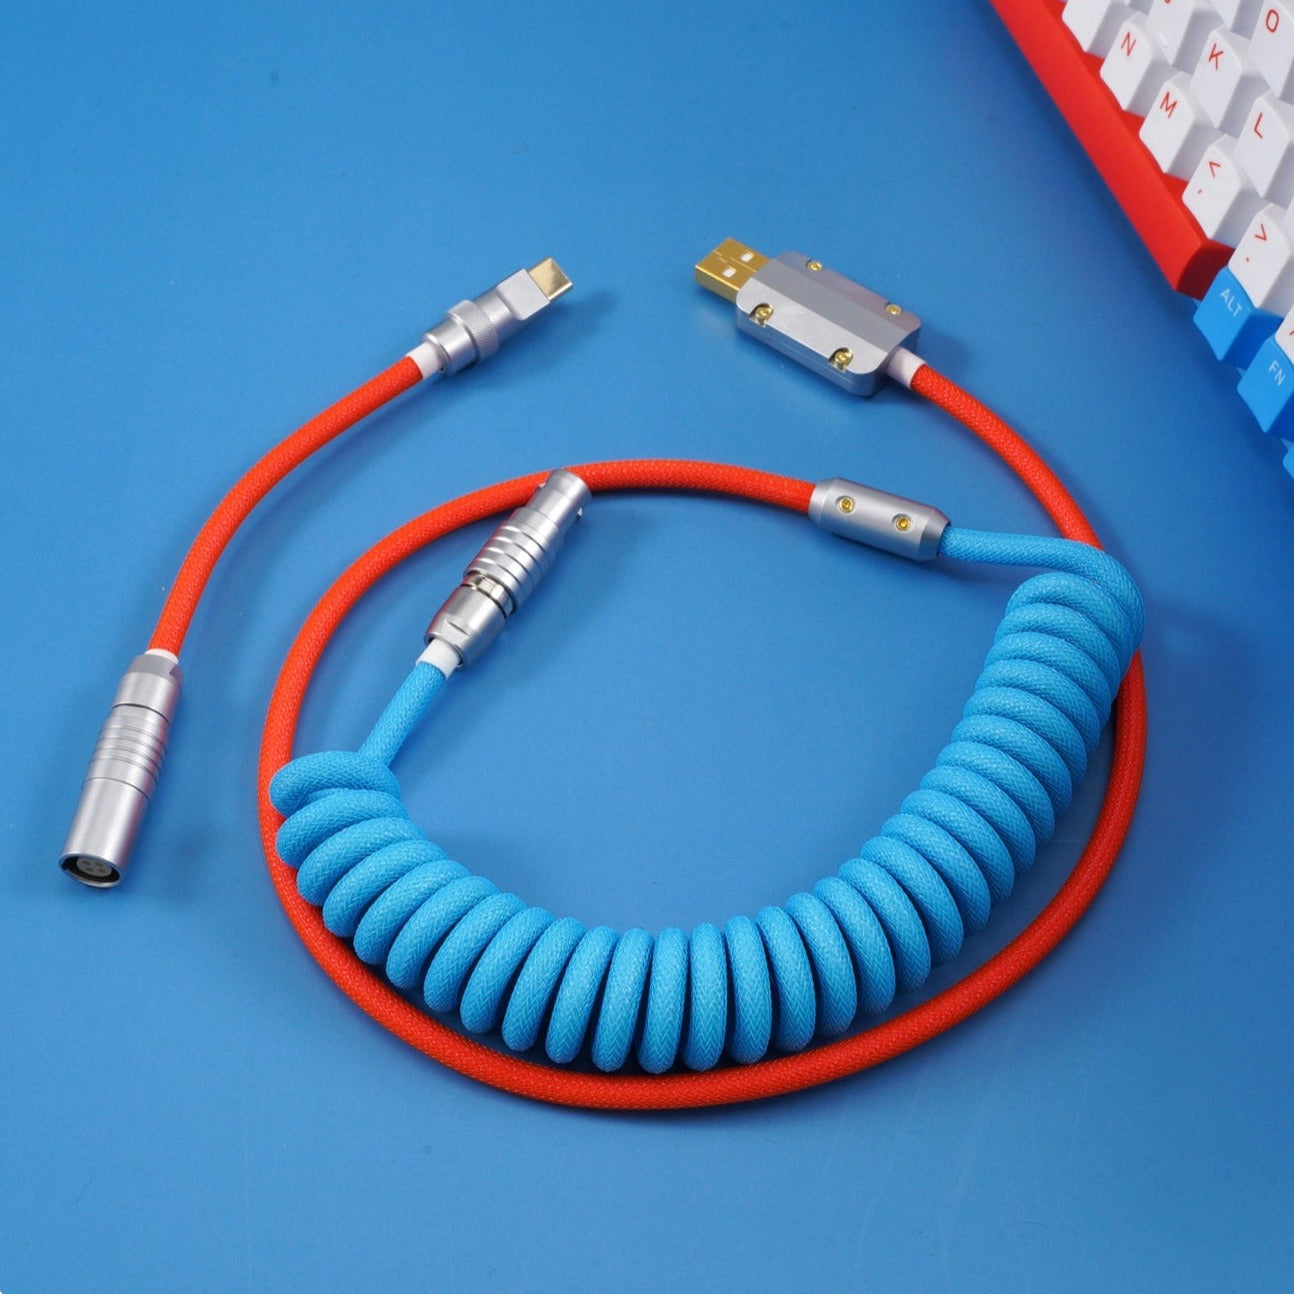 Sleeved Coiled Keyboard Aviator Cable, Lemo Style Connector - Blue/Red